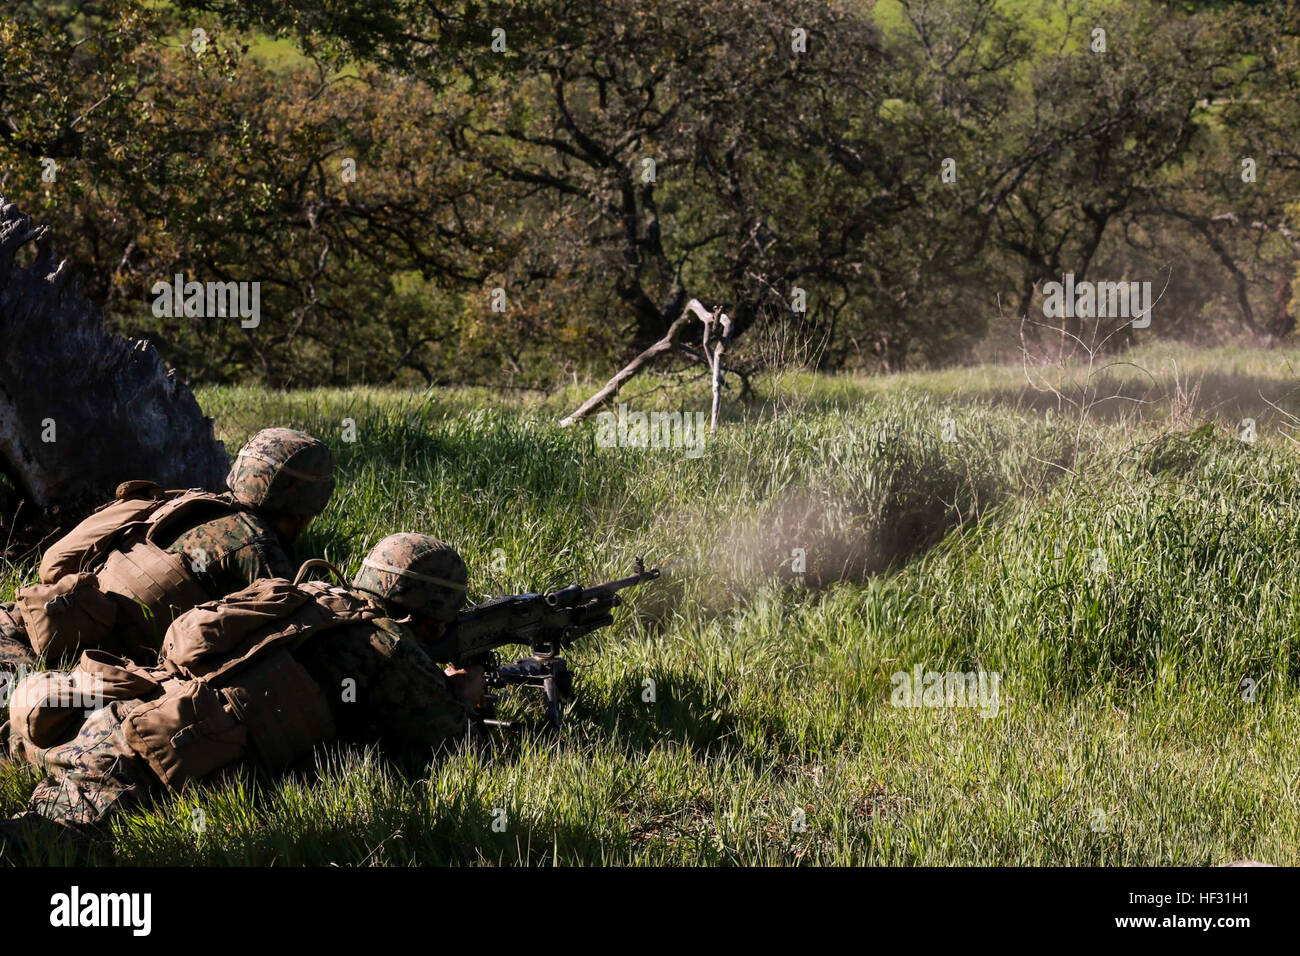 U.S. Marines with Battalion Landing Team 3rd Battalion, 1st Marine Division, 15th Marine Expeditionary Unit, fire a 240B medium machinegun during Amphibious Squadron/Marine Expeditionary Unit Integration Training (PMINT) aboard Camp Pendleton, Calif., March 5, 2015. The Marines of BLT 3/1 used PMINT to hone their skills in a field environment to improve their combat effectiveness as a unit.    (U.S. Marine Corps photo by Sgt. Jamean Berry/Released) 15th MEU Marines sharpen their combat skills 150307-M-GC438-374 Stock Photo